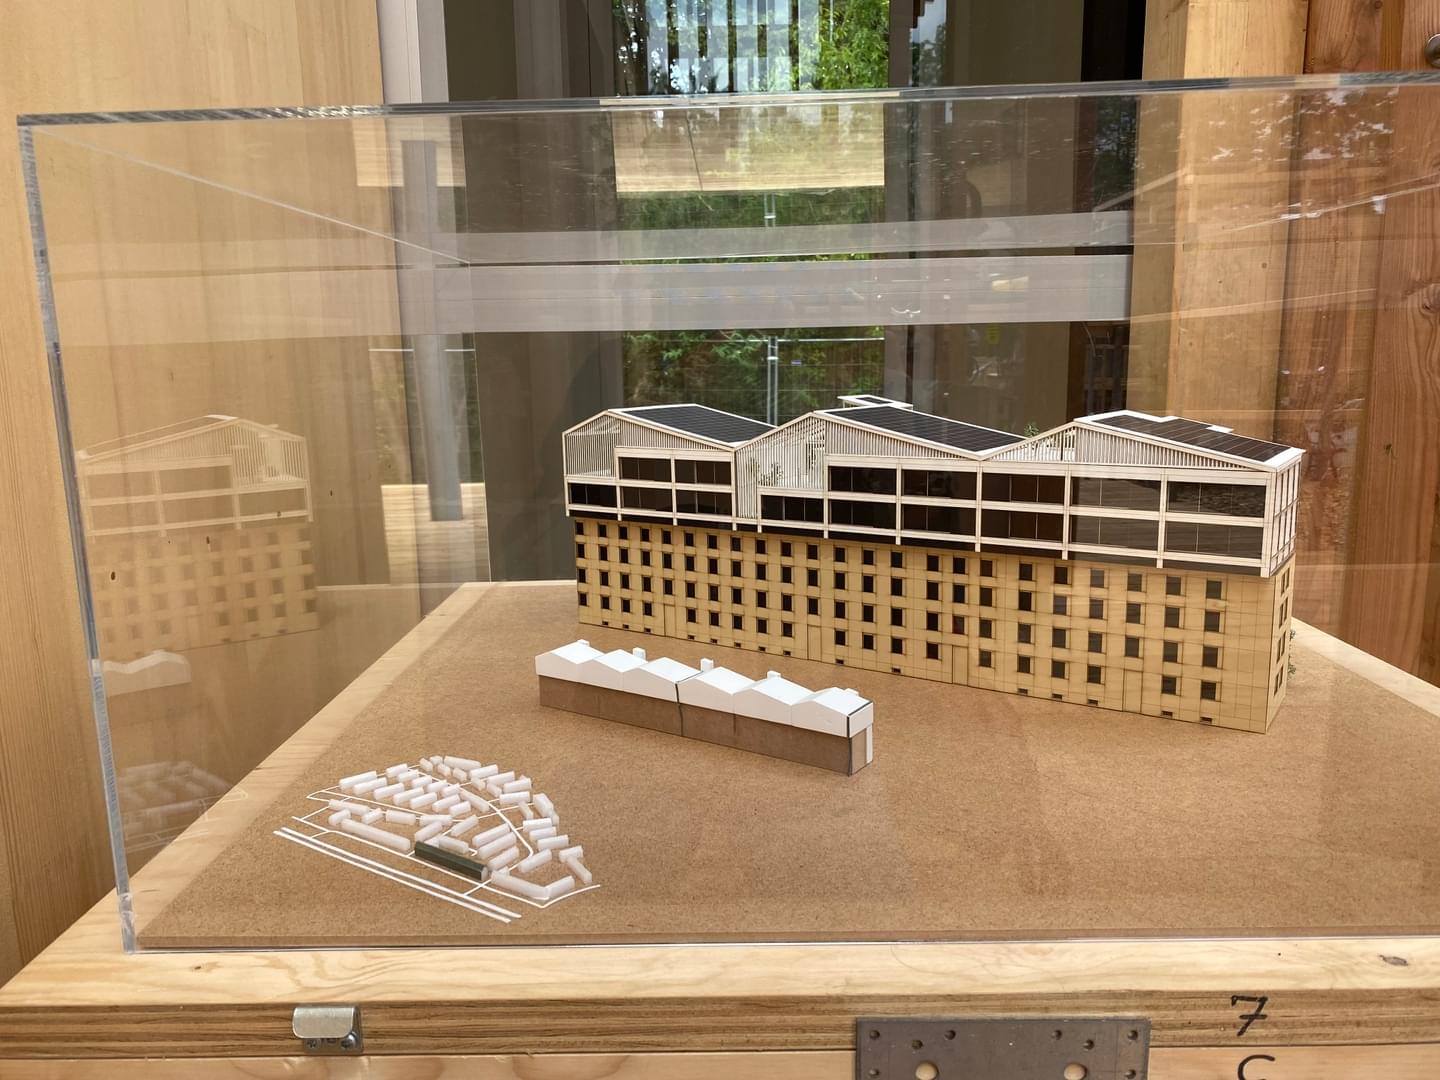 architectural model and parking garage at our HDU in Wuppertal